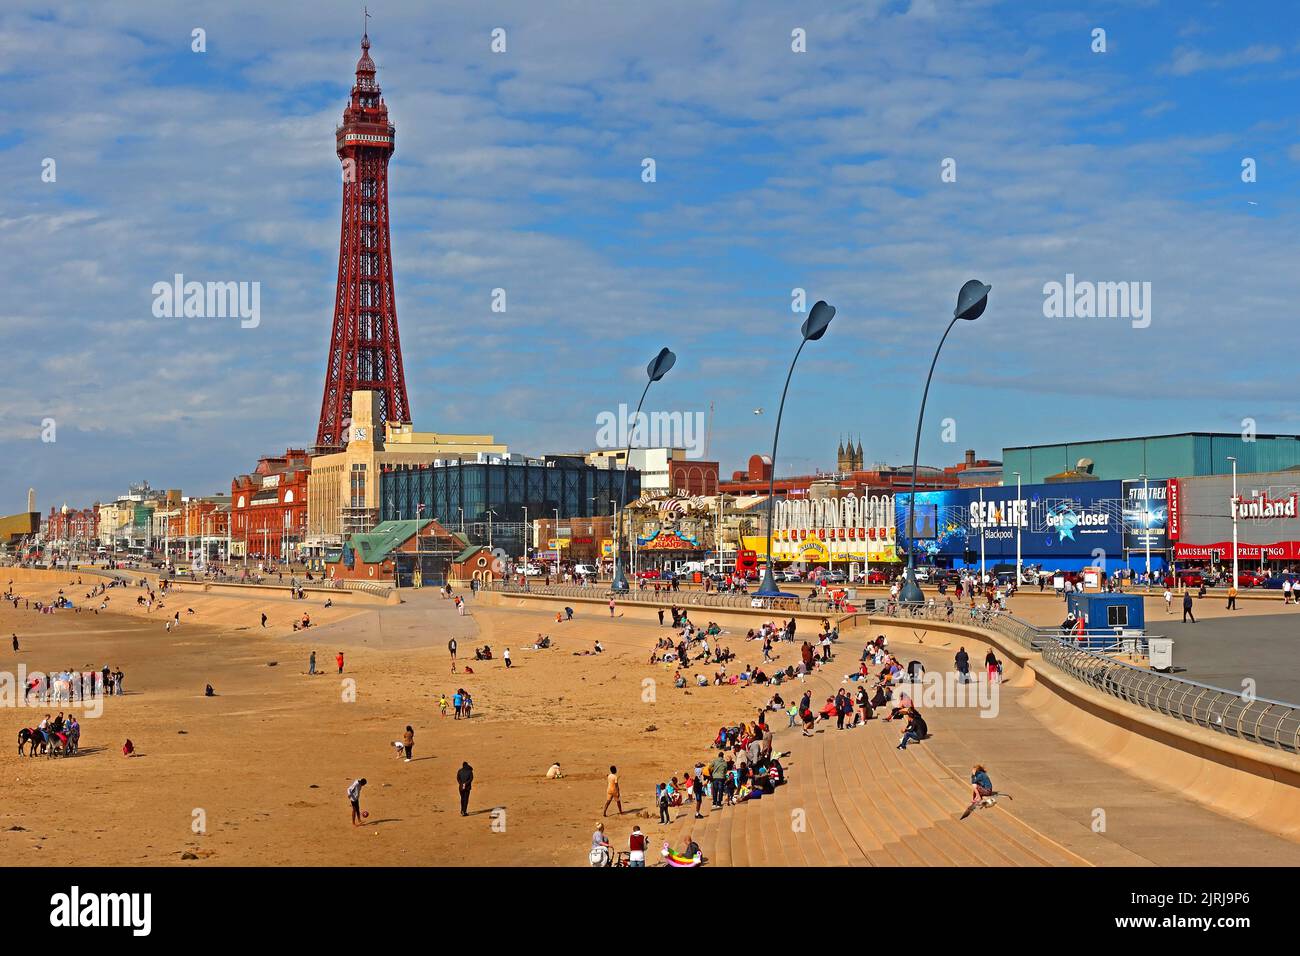 Summer english seaside view of Blackpool promenade, tower, sea life centre, Coral Island, beach of tourists, the perfect British holiday Stock Photo